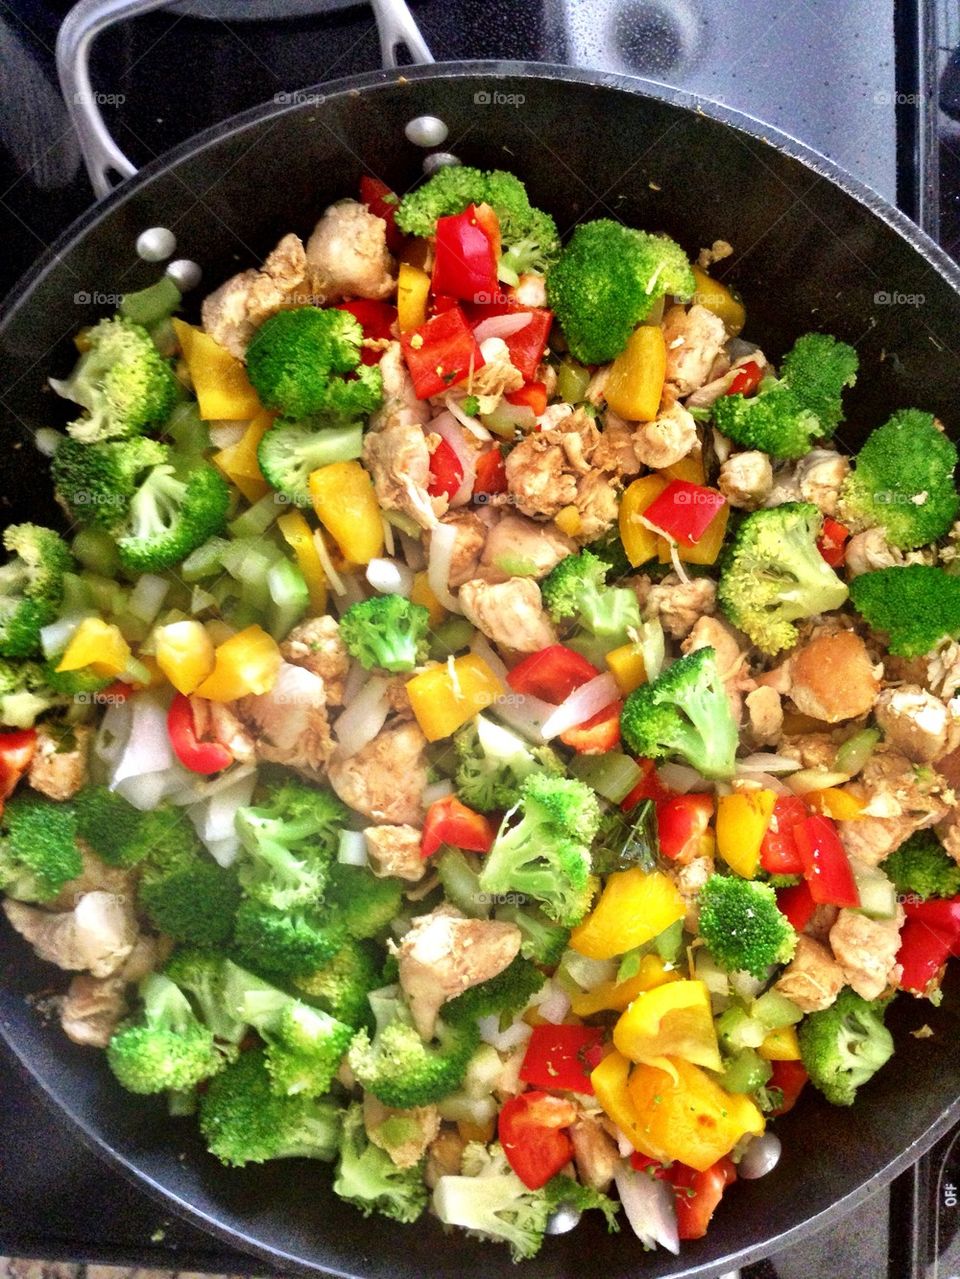 Cooking vegetables with chicken